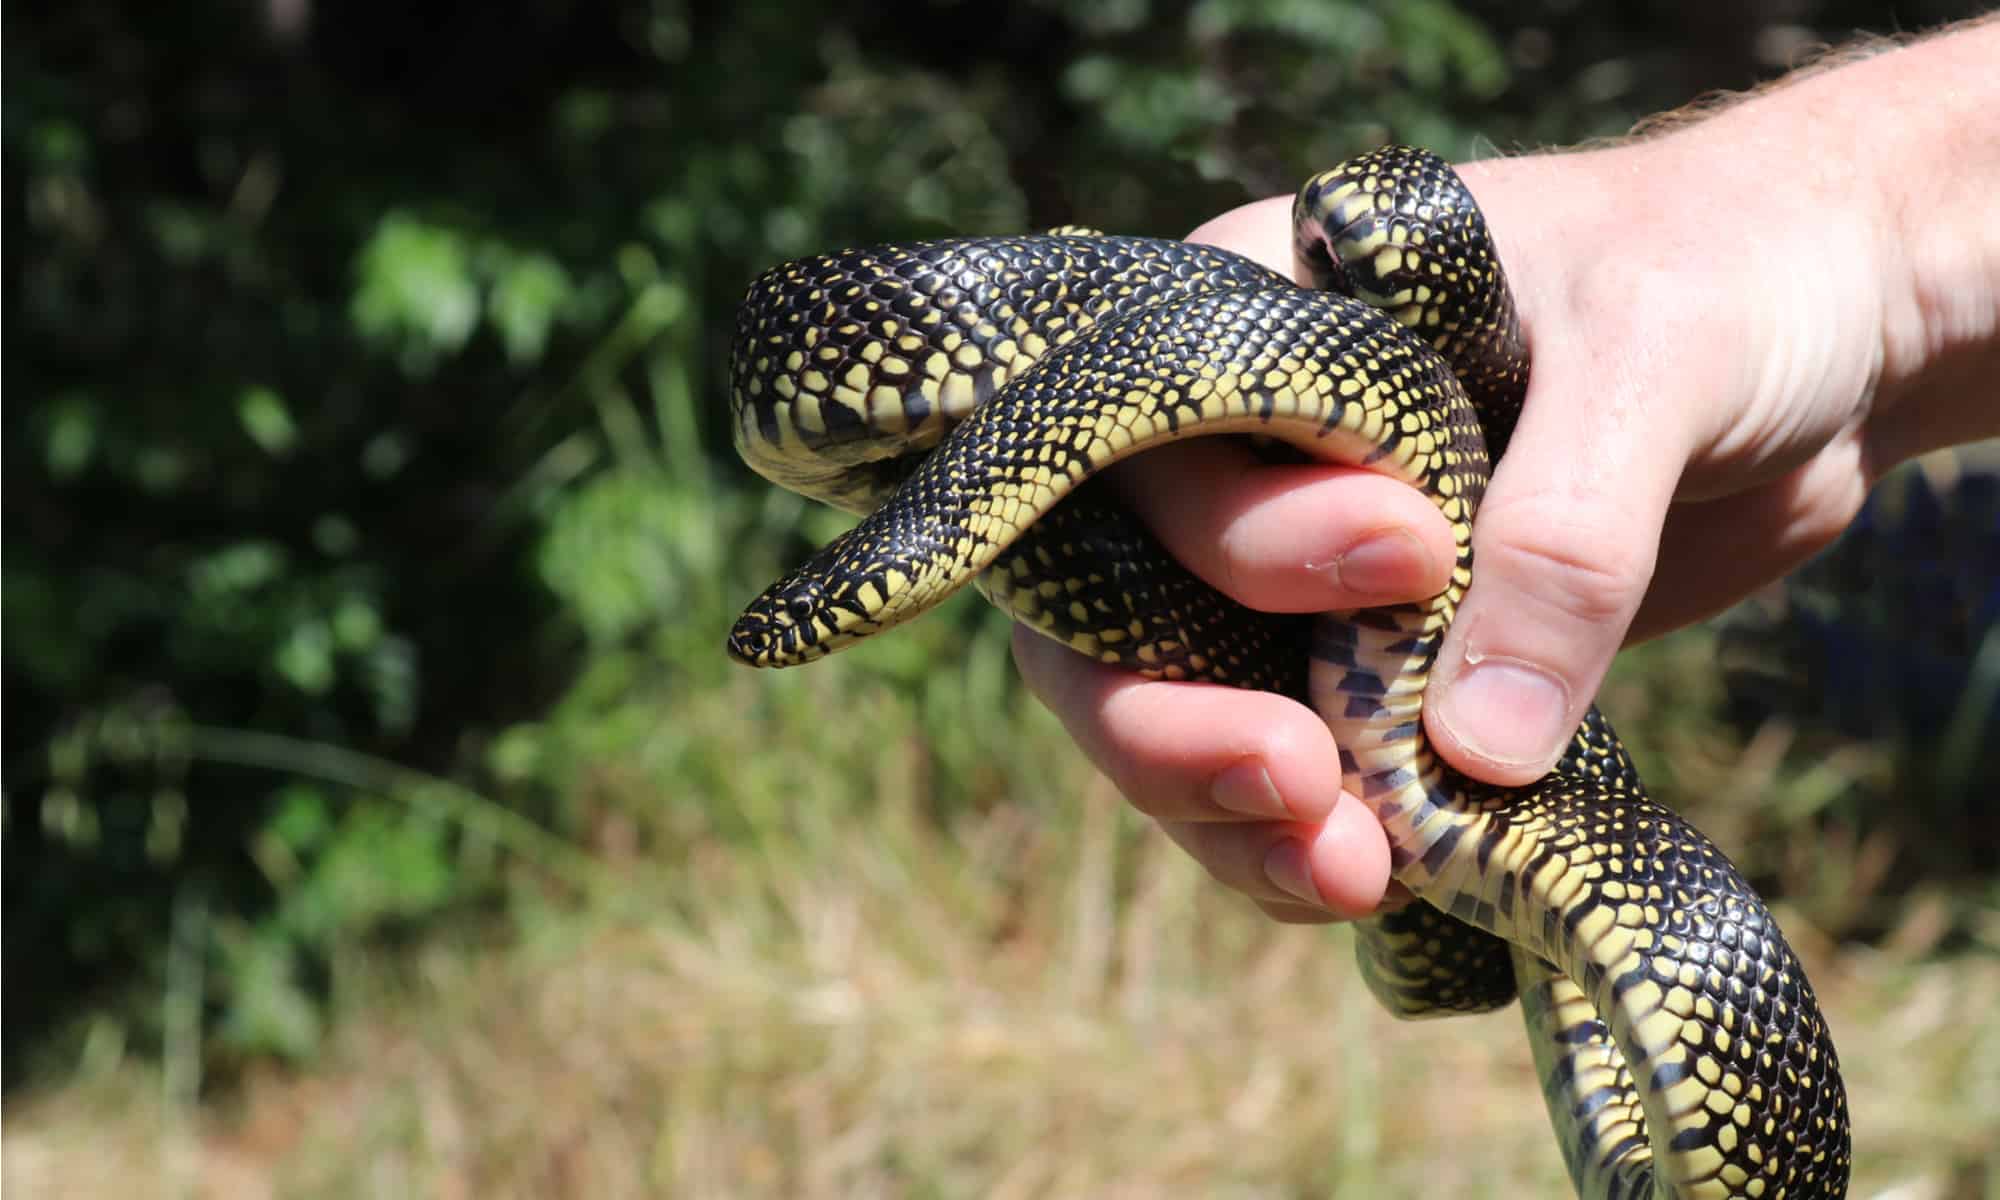 Speckled Kingsnake is a medium size snake that normally grows to about 4 feet in length.